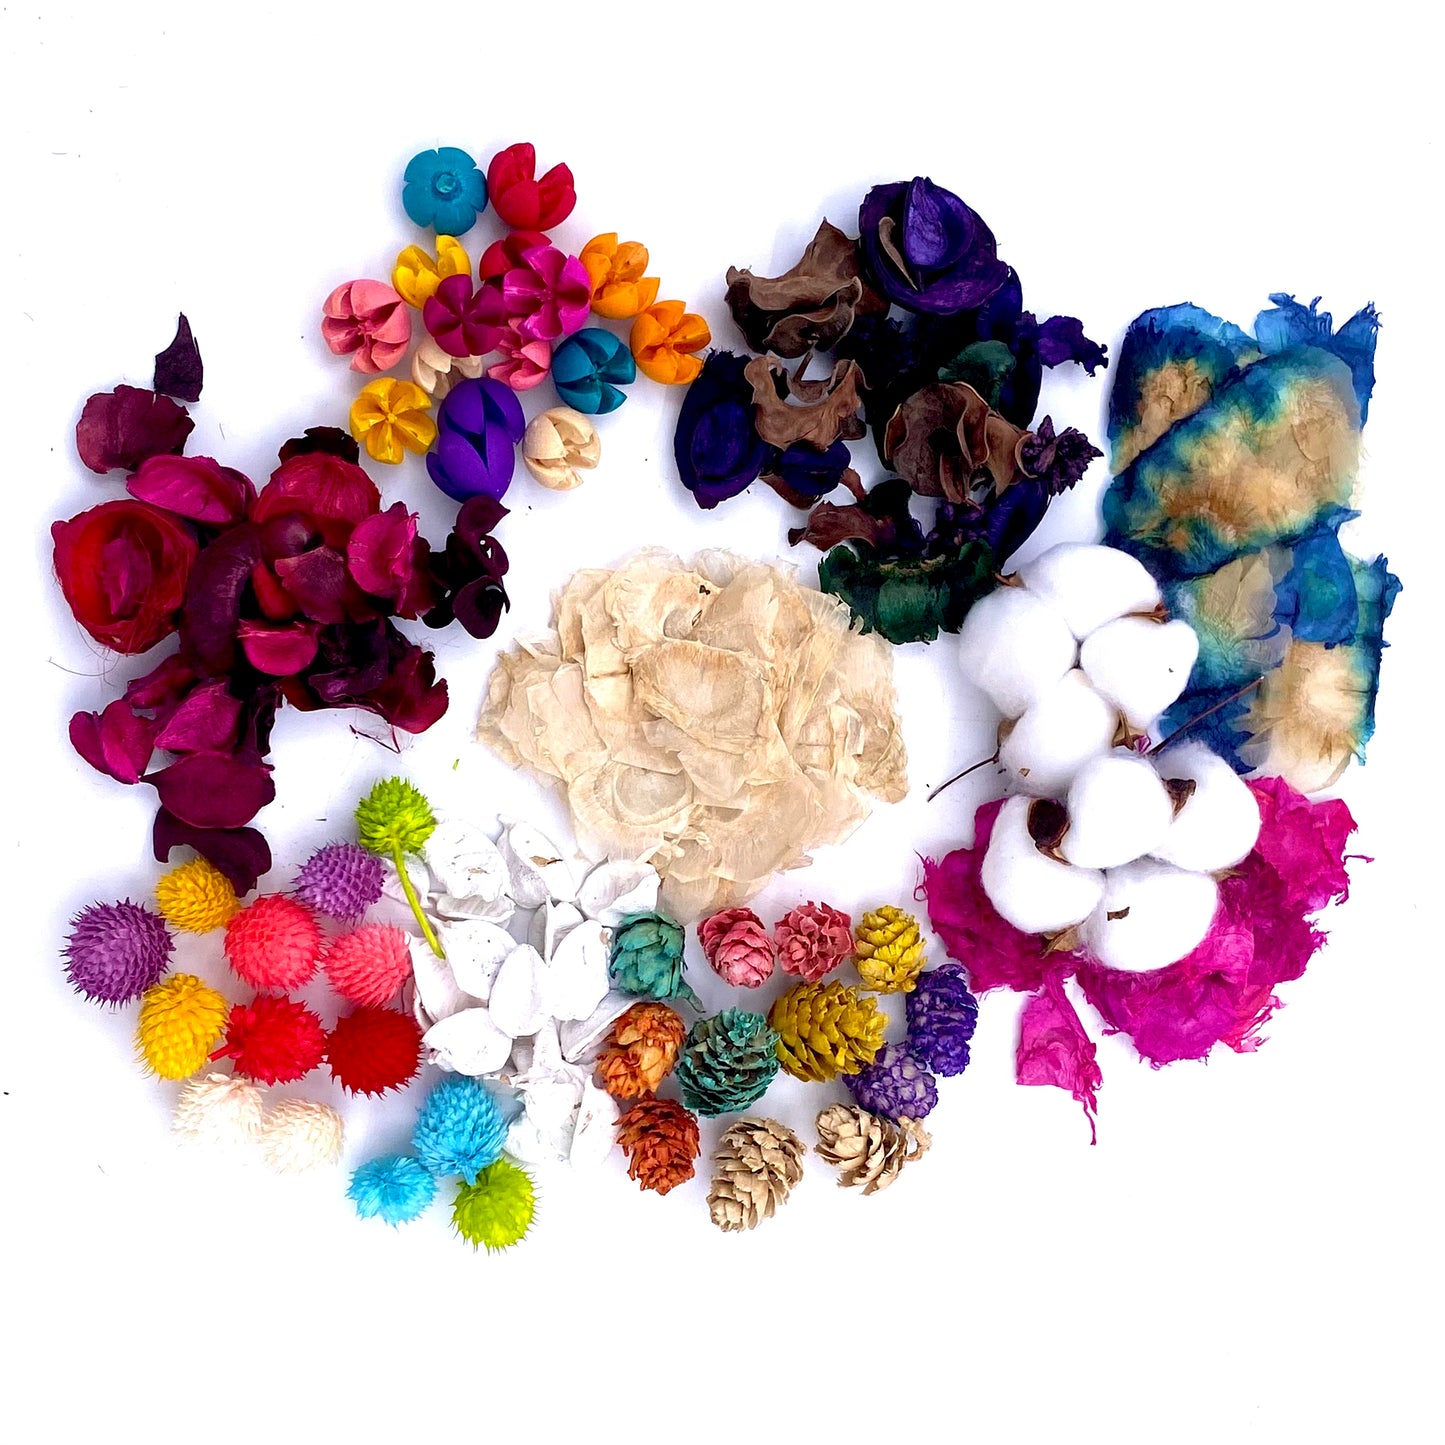 Mega Seed And Nut Pack( All Natural Dyed),Australian Fairy Garden Products, Fairies